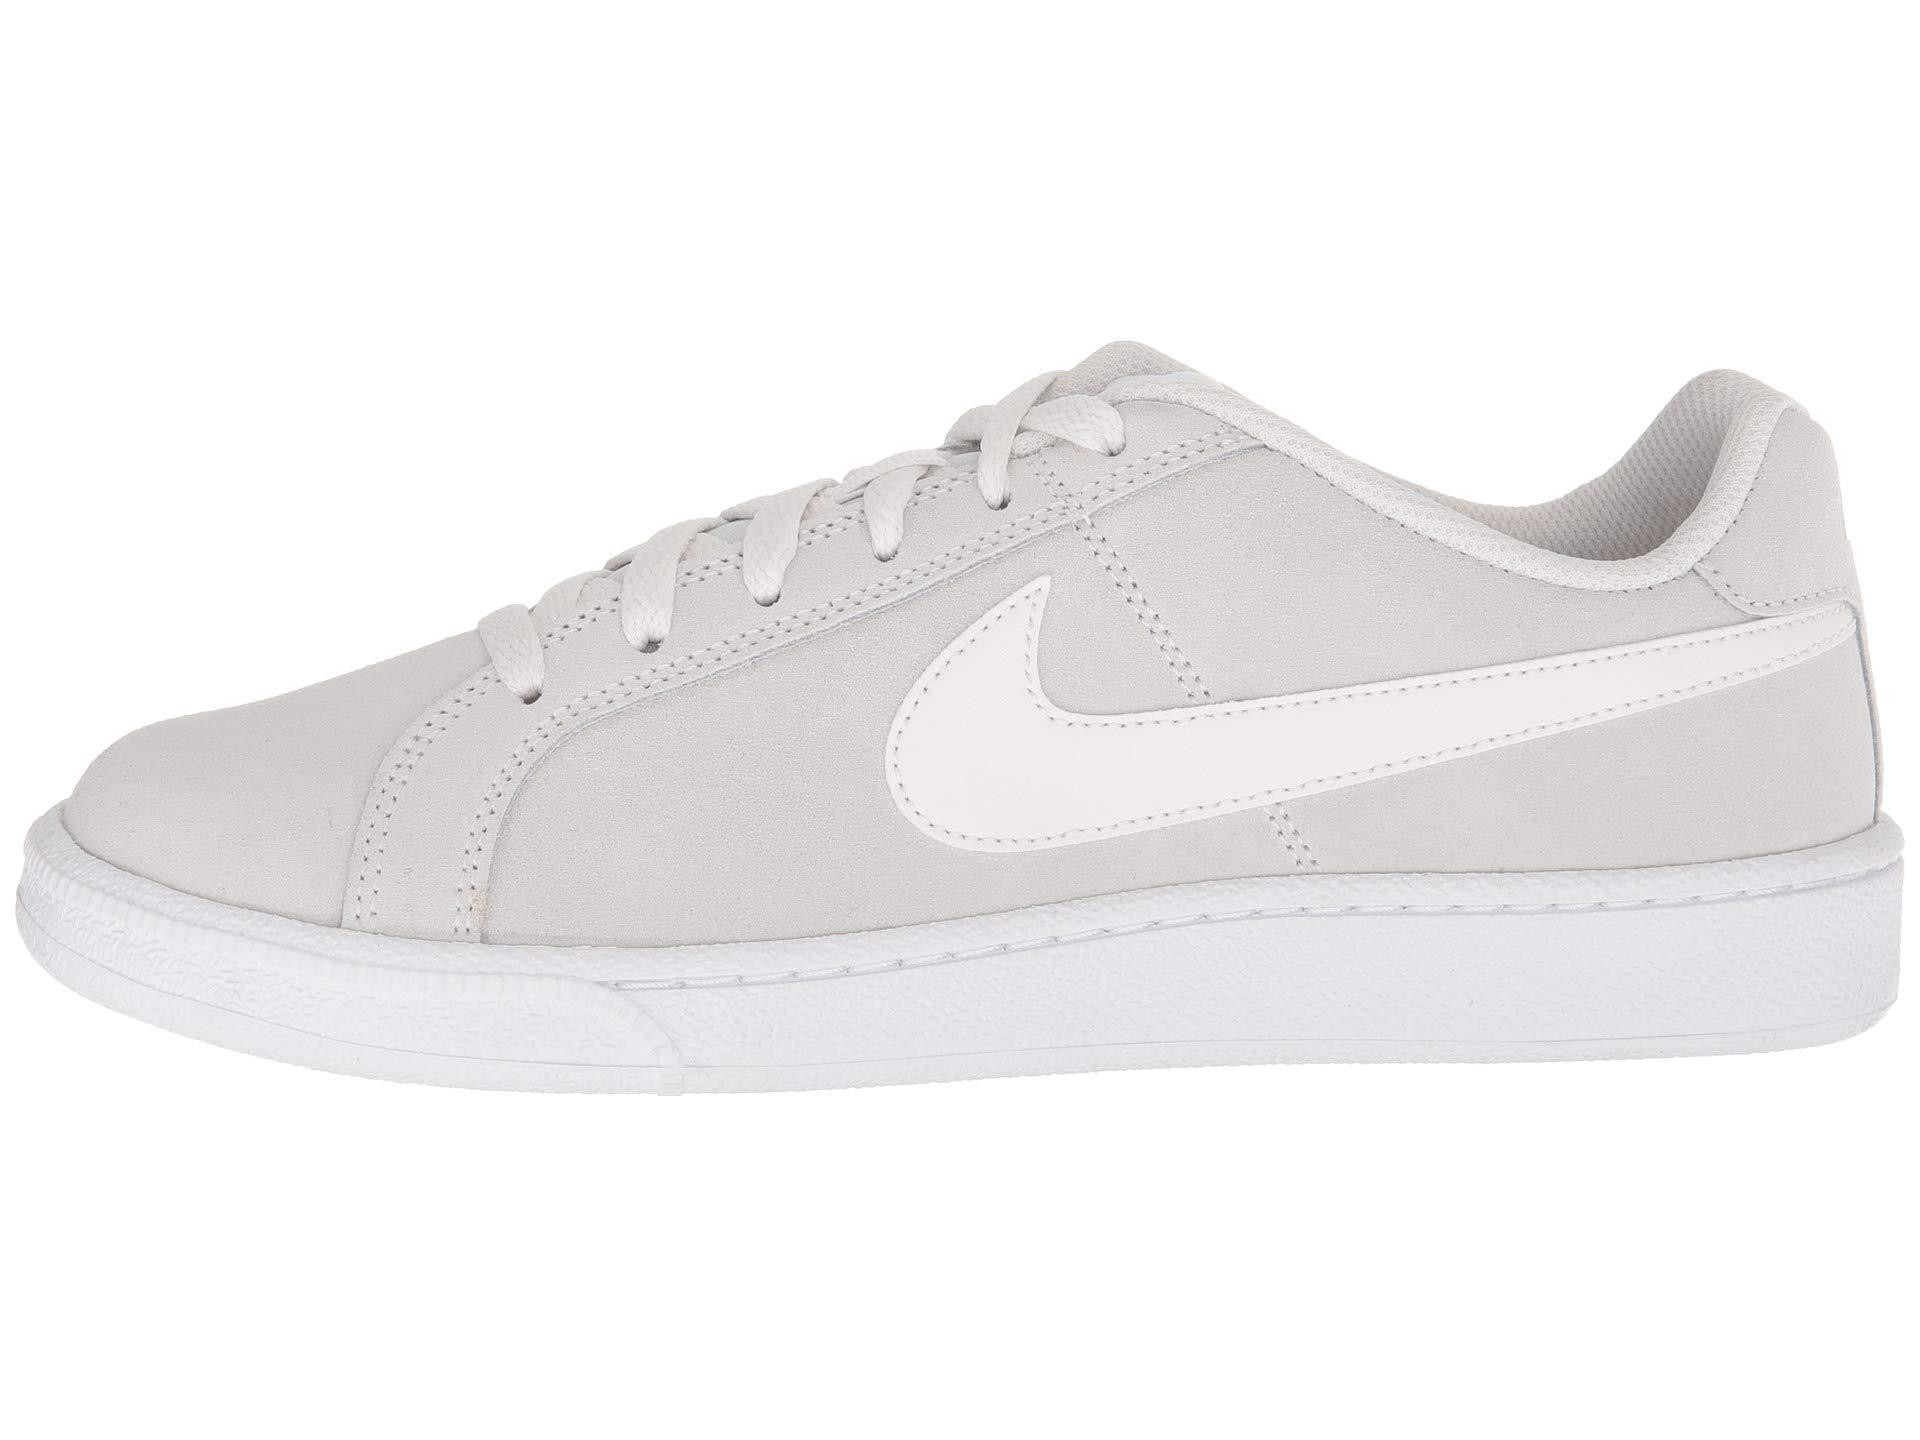 Nike Court Royale Suede in White - Lyst